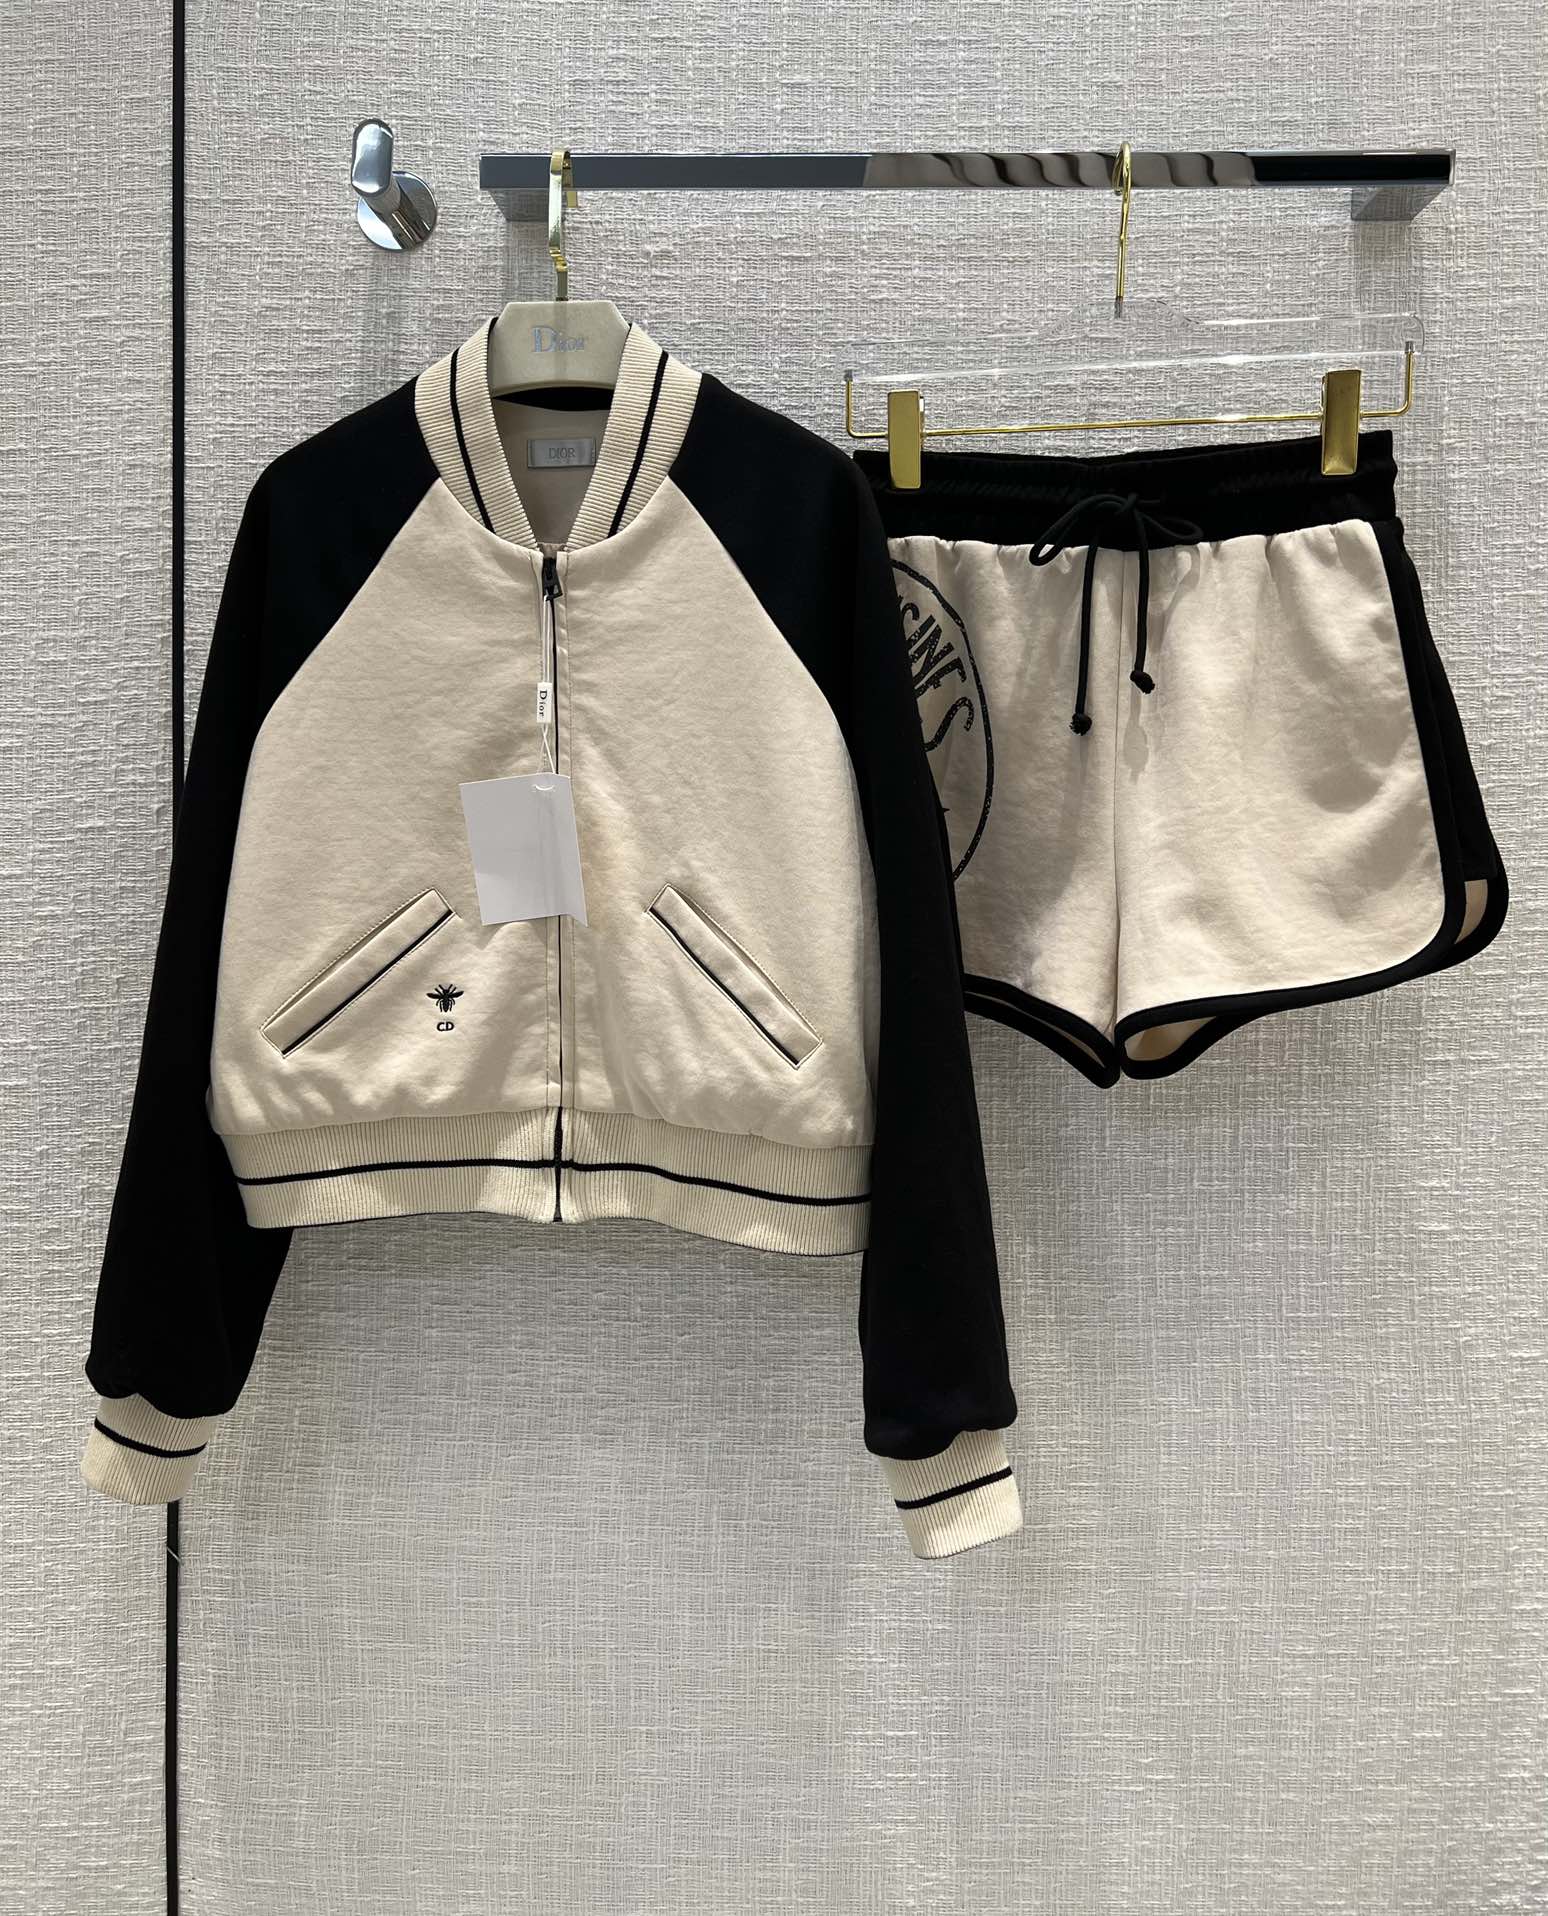 Dior Clothing Two Piece Outfits & Matching Sets Apricot Color Black Printing Cotton Sweatpants